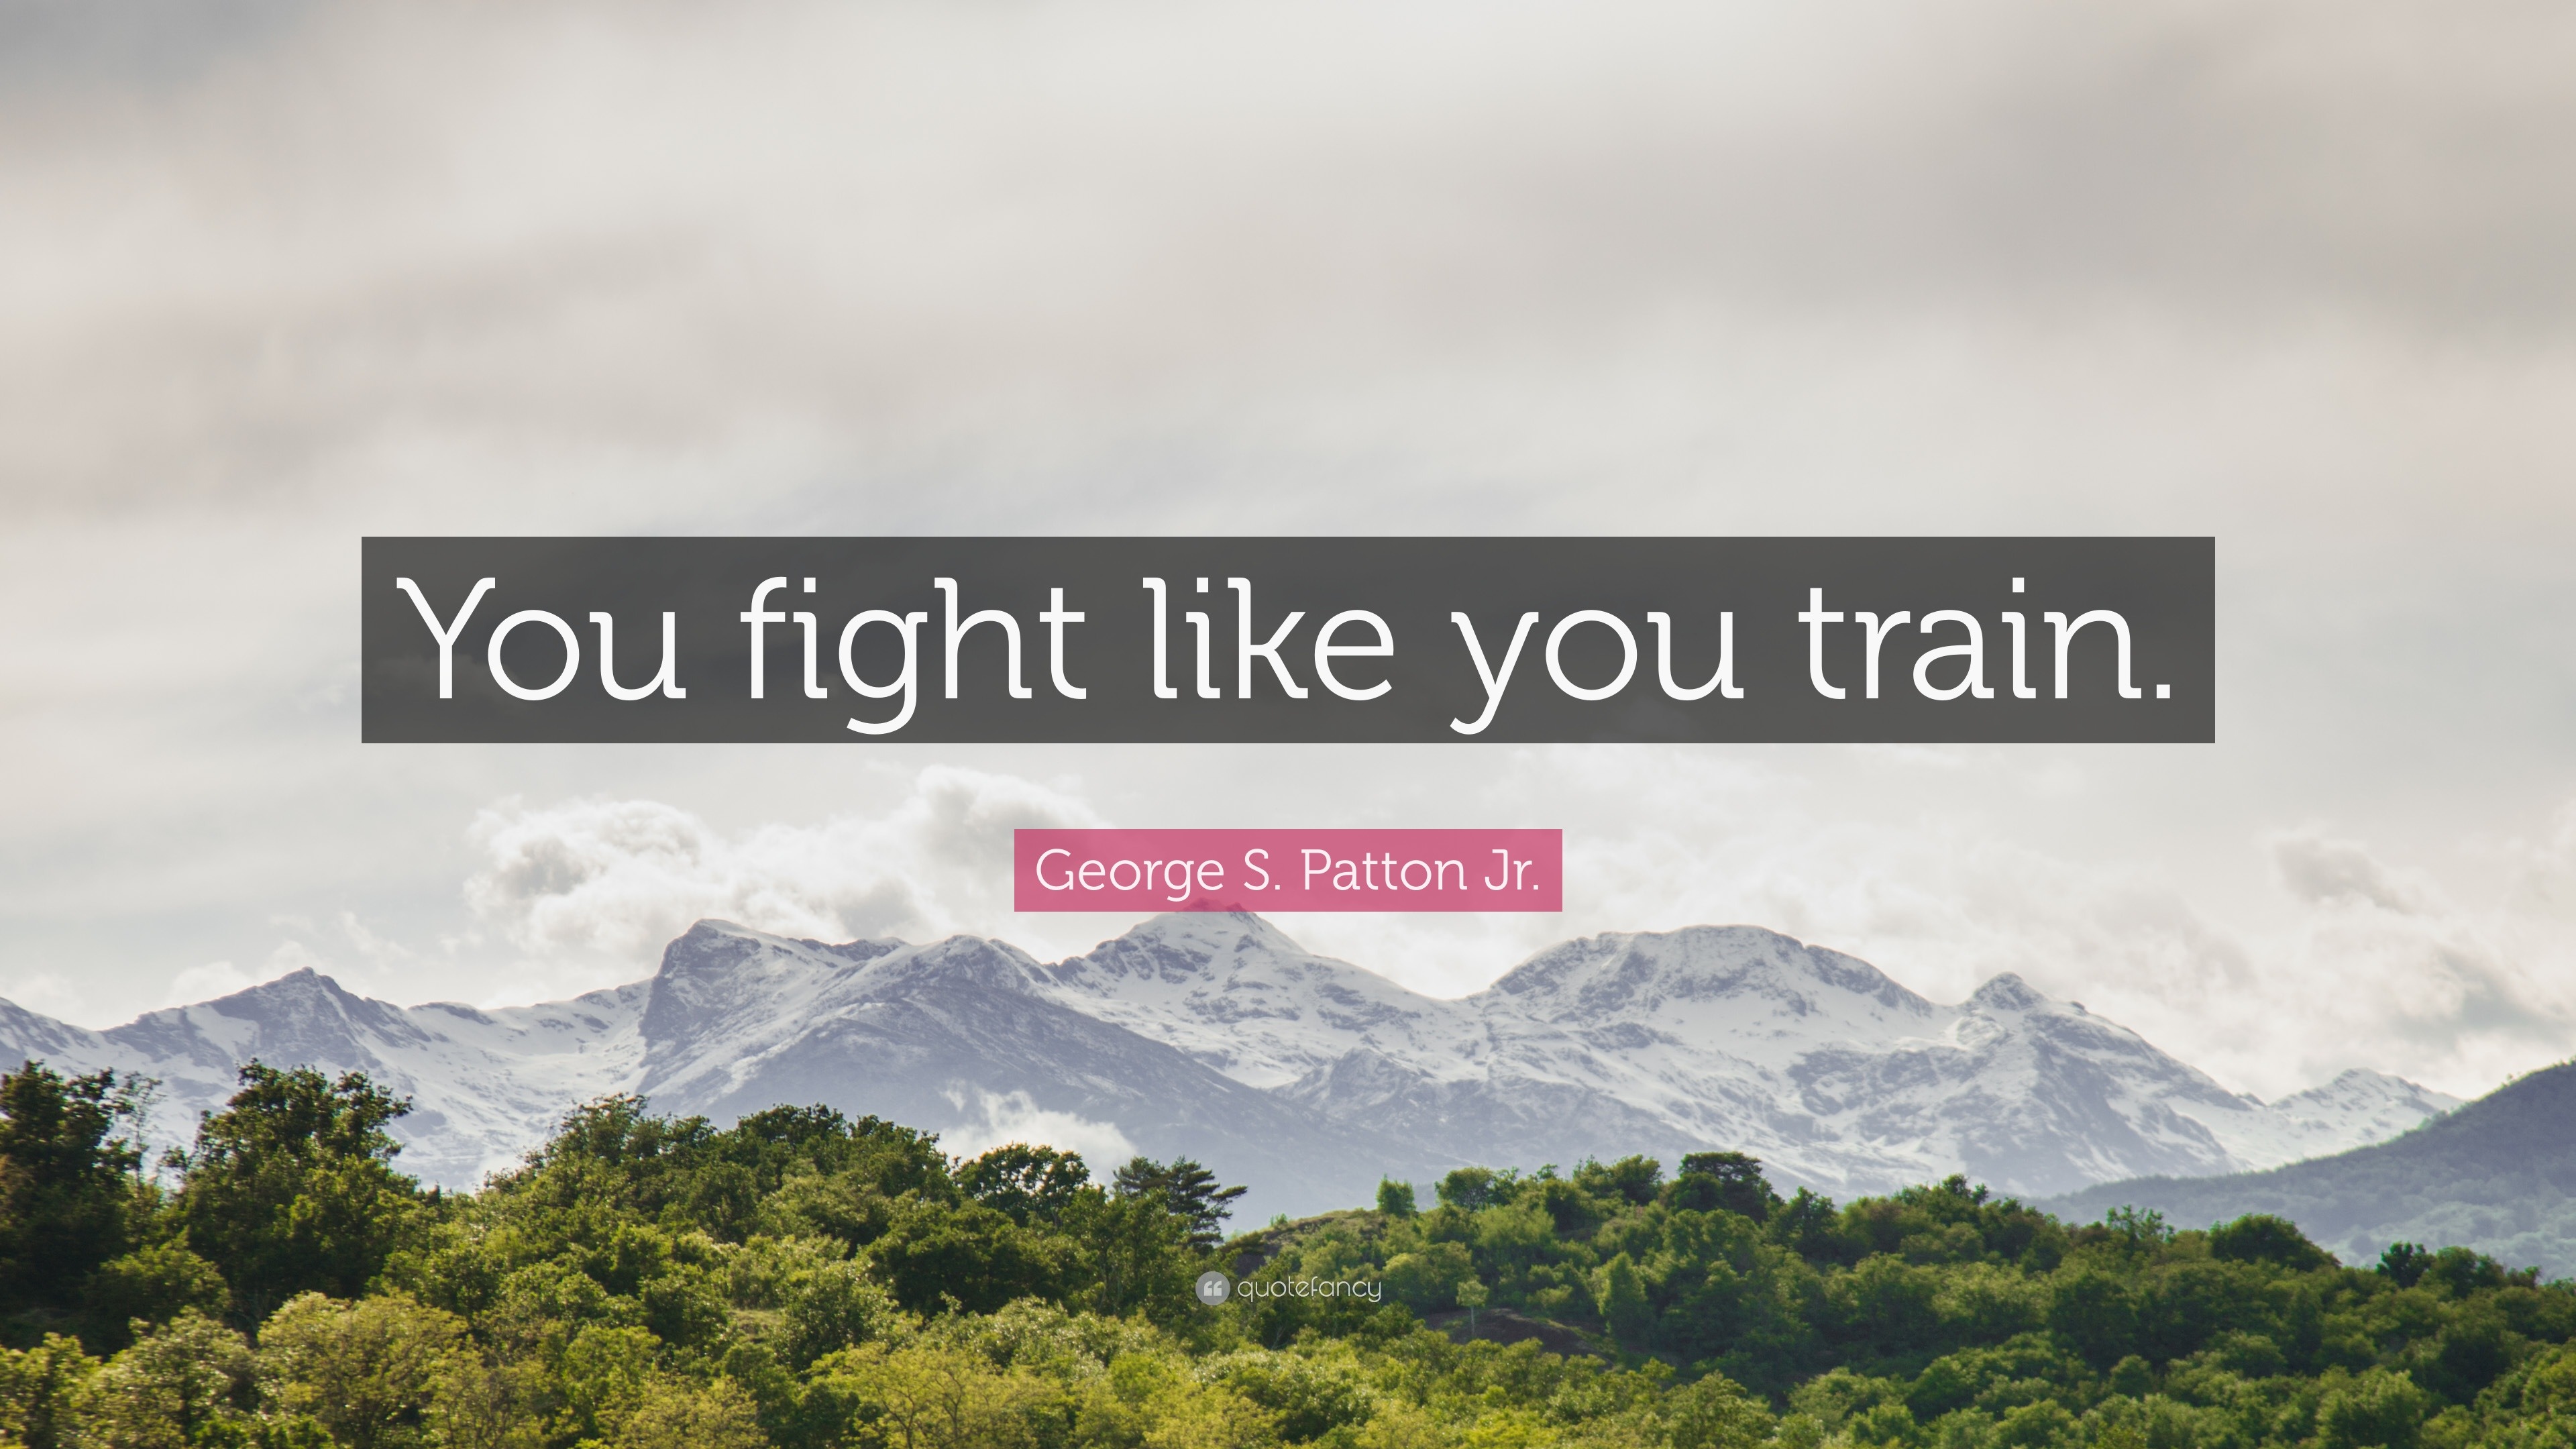 George S. Patton Jr. Quote: “You fight like you train.”